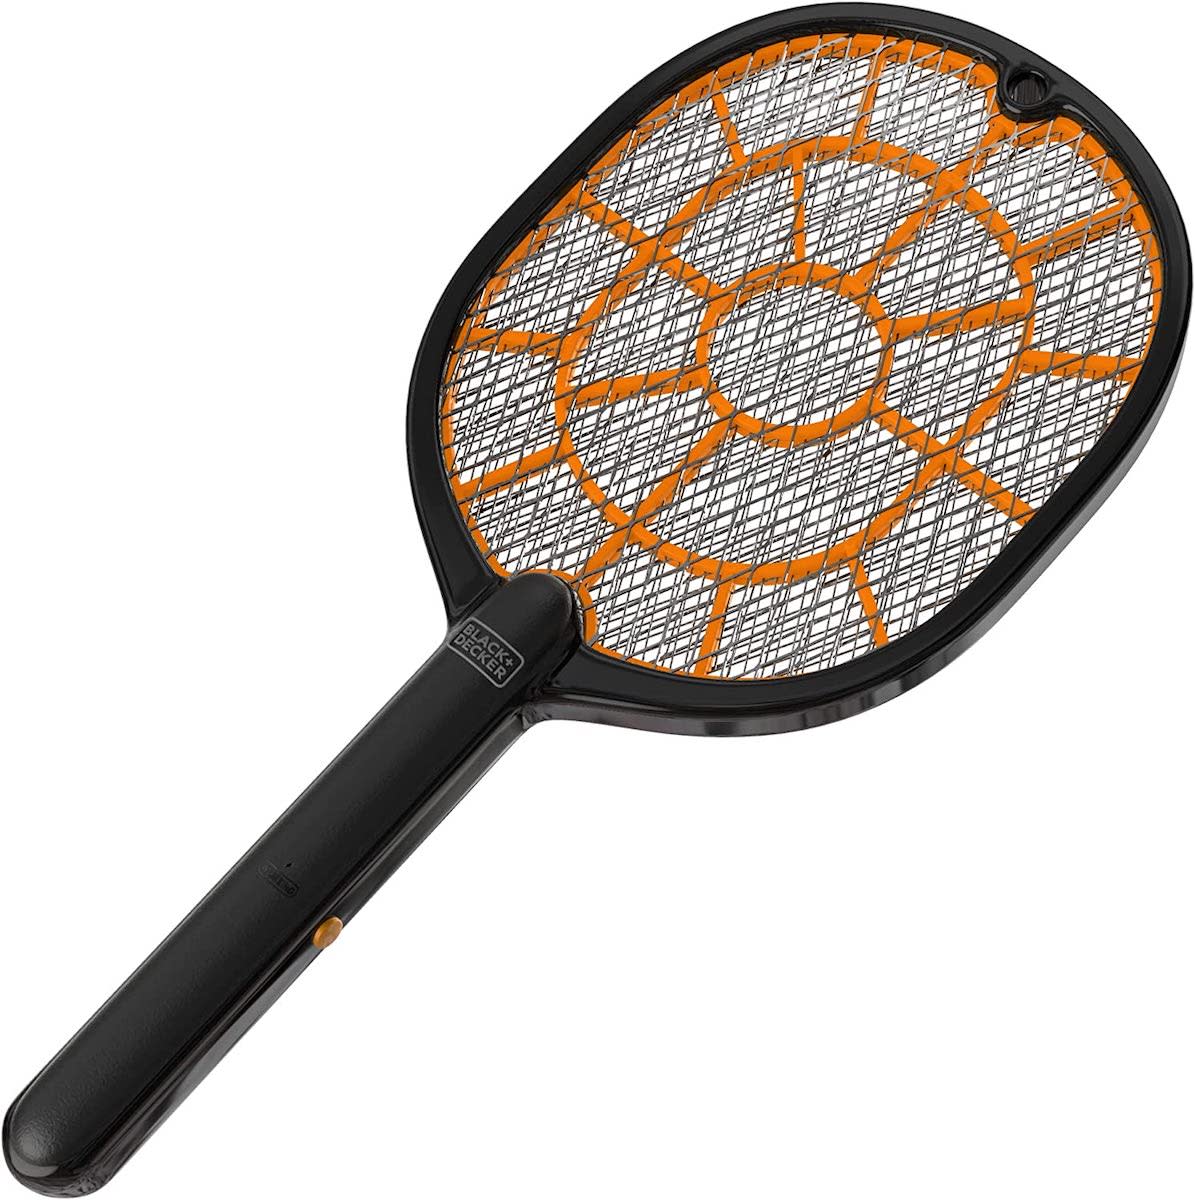 Southern California mosquito problem?? Here is a BLACK+DECKER Bug Zapp, Mosquito Repellent